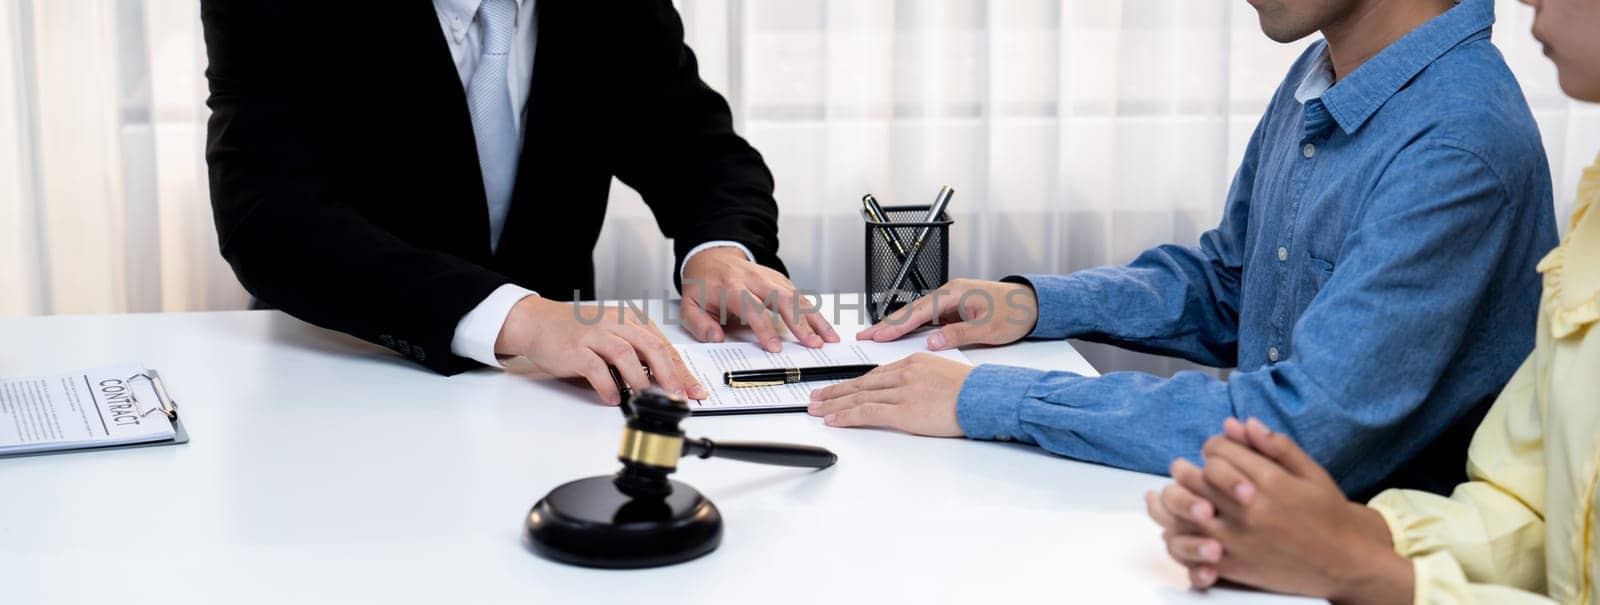 Couples file for divorcing and seek assistance from law firm. Rigid by biancoblue